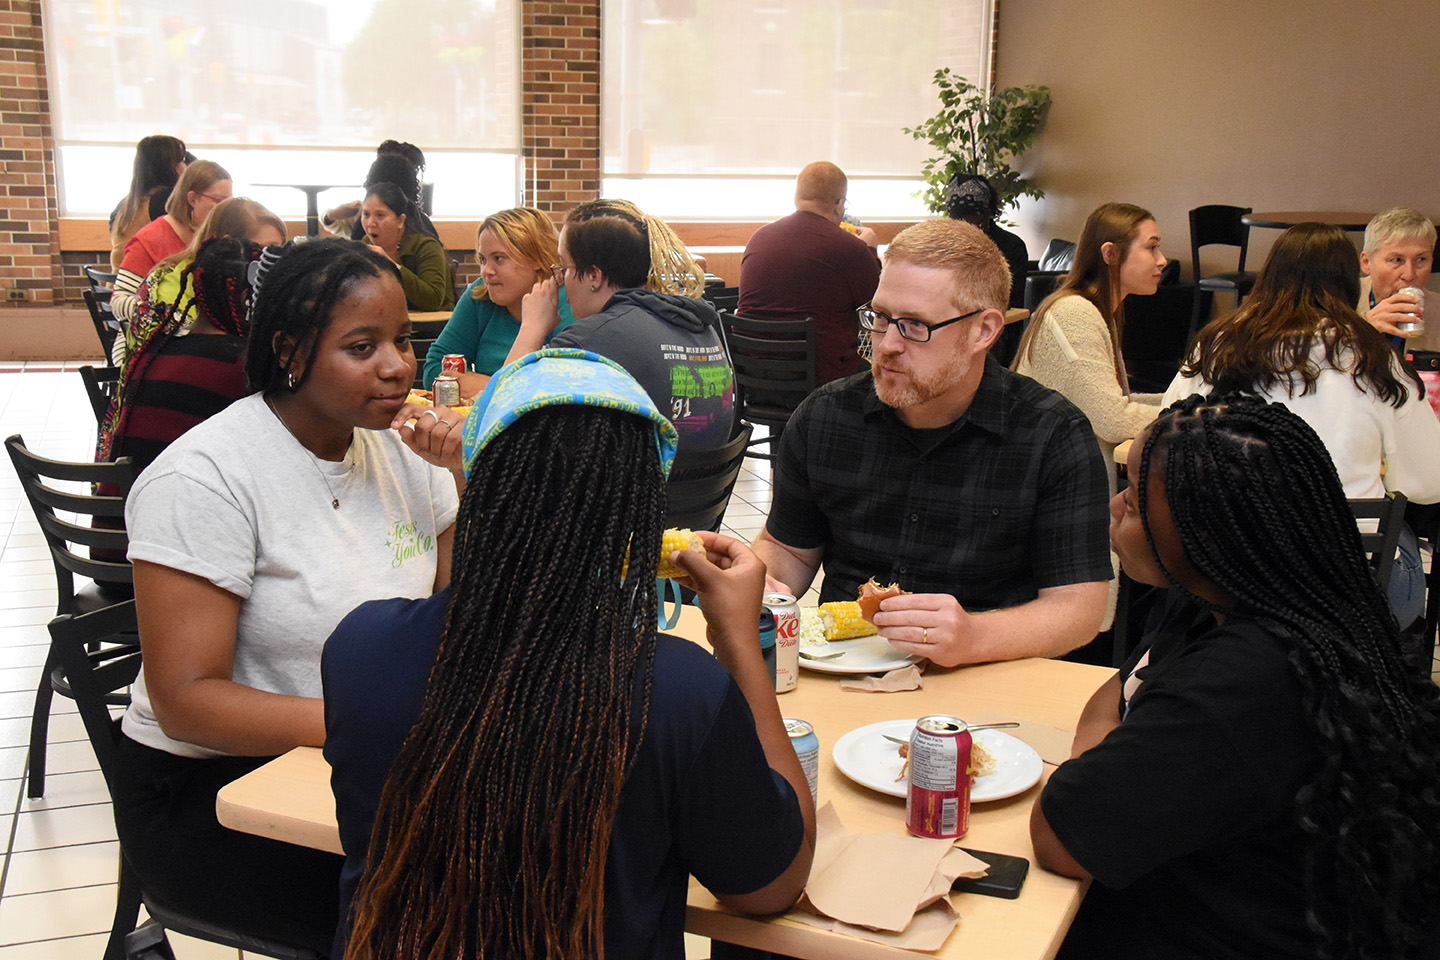 Students and instructors eating lunch and talking at tables of four in the Bistro.